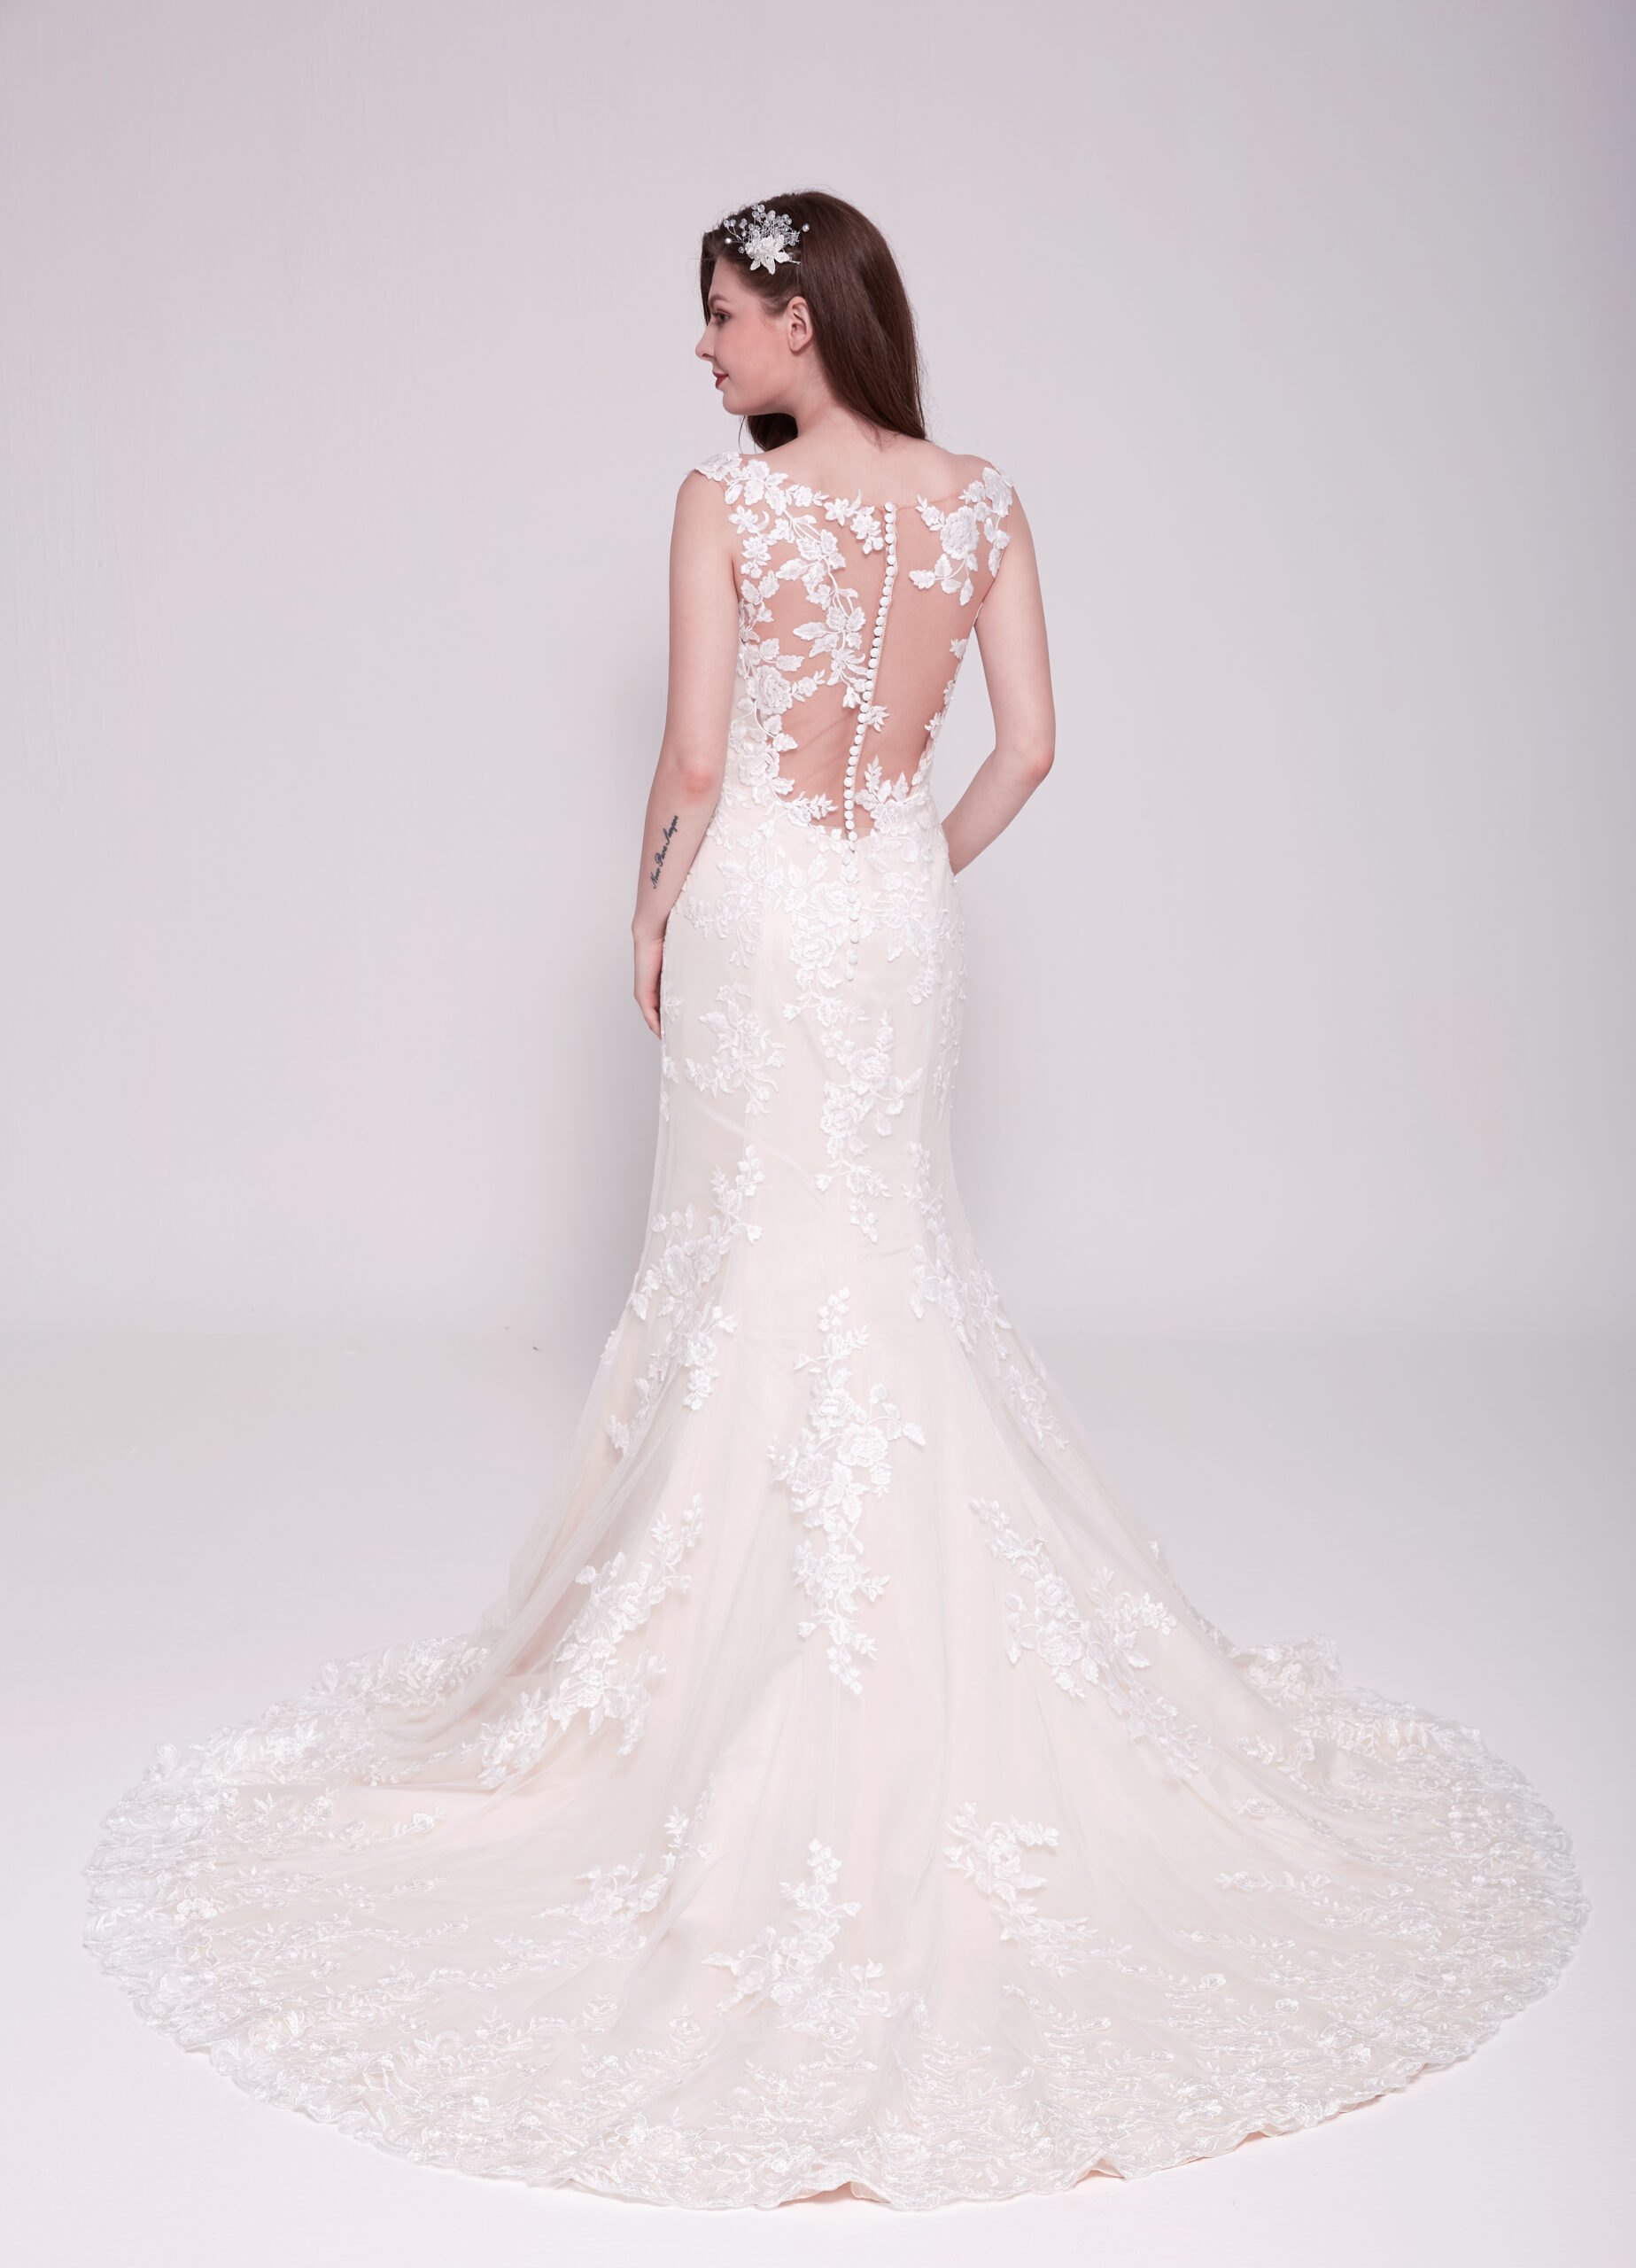 Fishtail Bridal Gowns